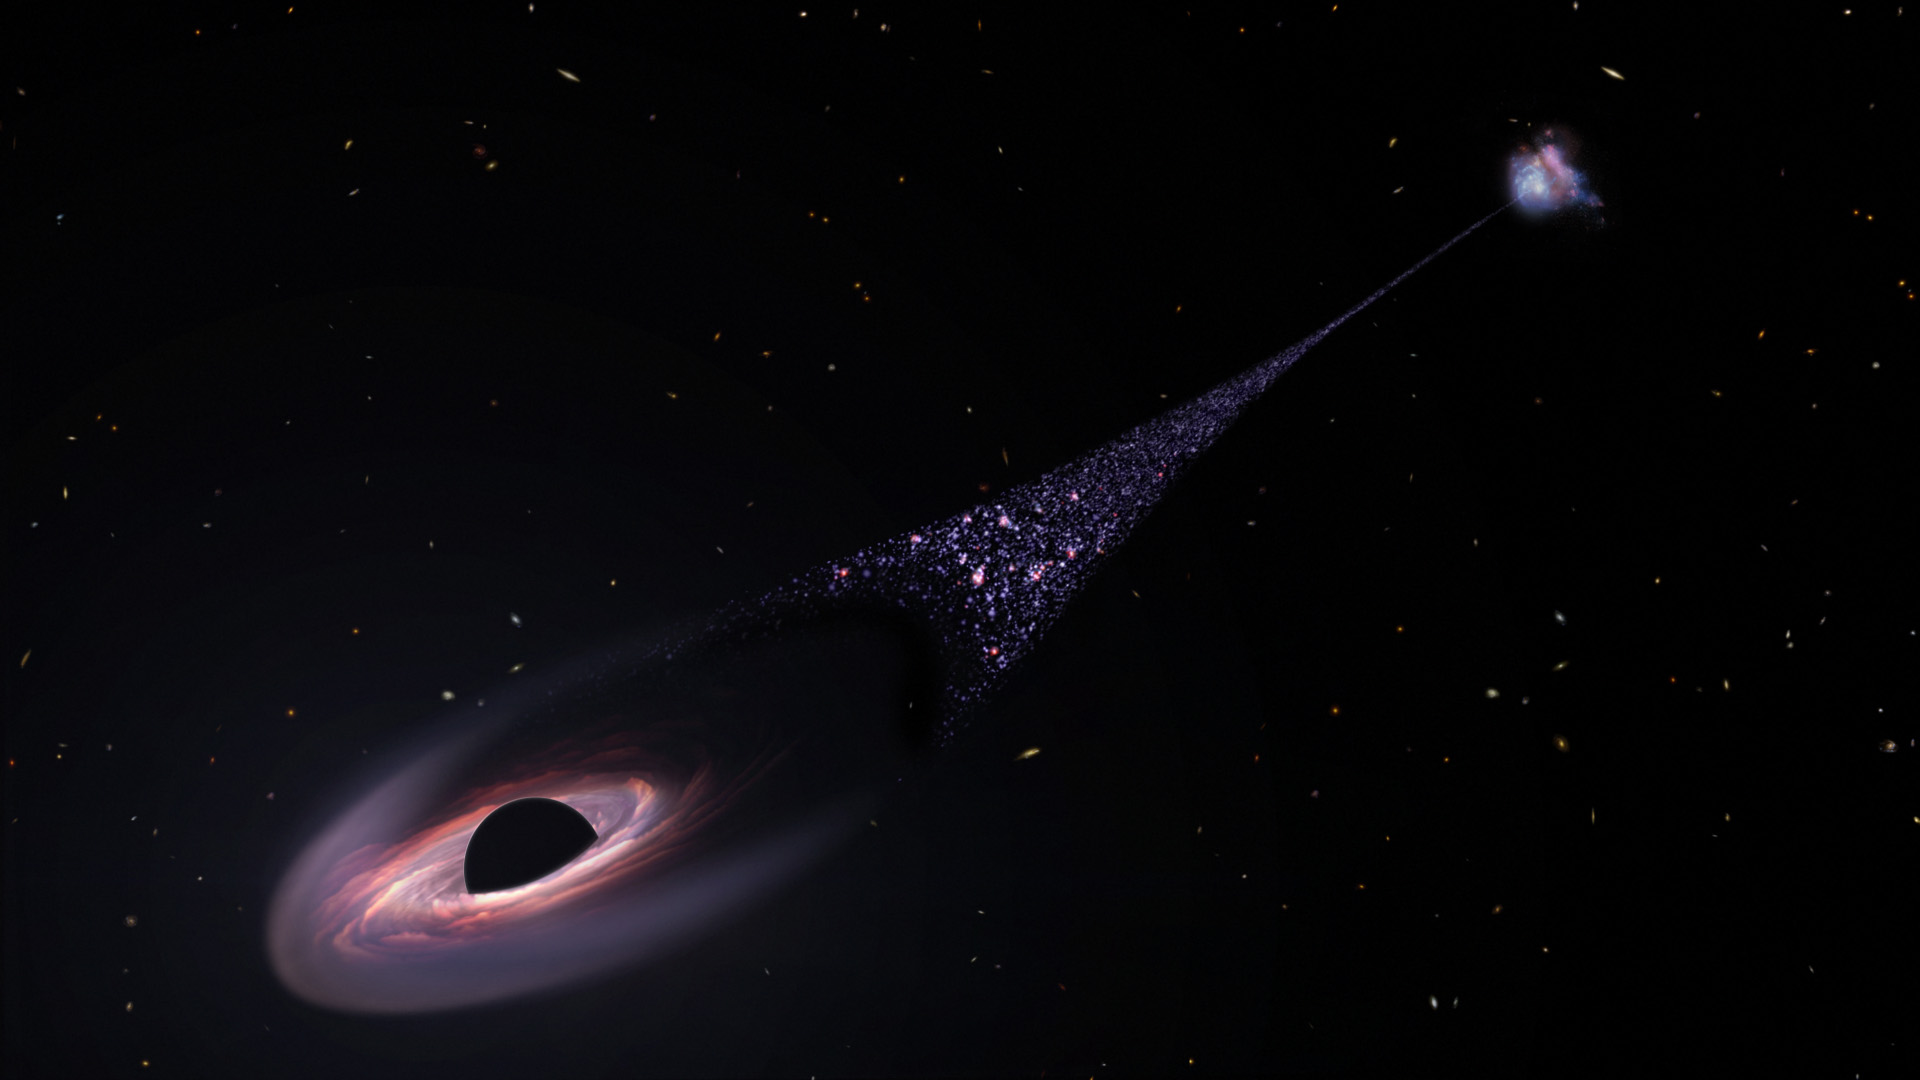 This illustration shows a black field speckled with white, yellow and red galaxies. A black hole near the bottom left corner of the image plows through space, leaving a diagonal trail of newborn stars stretching back to the black hole's parent galaxy in the upper right corner. The black hole is represented by a black half-sphere. It is encircled by an elongated disk of material compressed on the lower left side and trailing off on the upper right side. The material closest to the black hole appears pink, white and streaky. Beyond this, the leading edge of the disk, near the bottom, left corner, is milky violet. The disk trails off behind the black hole, becoming black. Beyond the disk, a diagonal "contrail" of blue and pink stars extends toward the blue-and-pink parent galaxy. The bridge of stars trails off, becoming narrower as it approaches the galaxy. For more details, read the Extended Text Description.